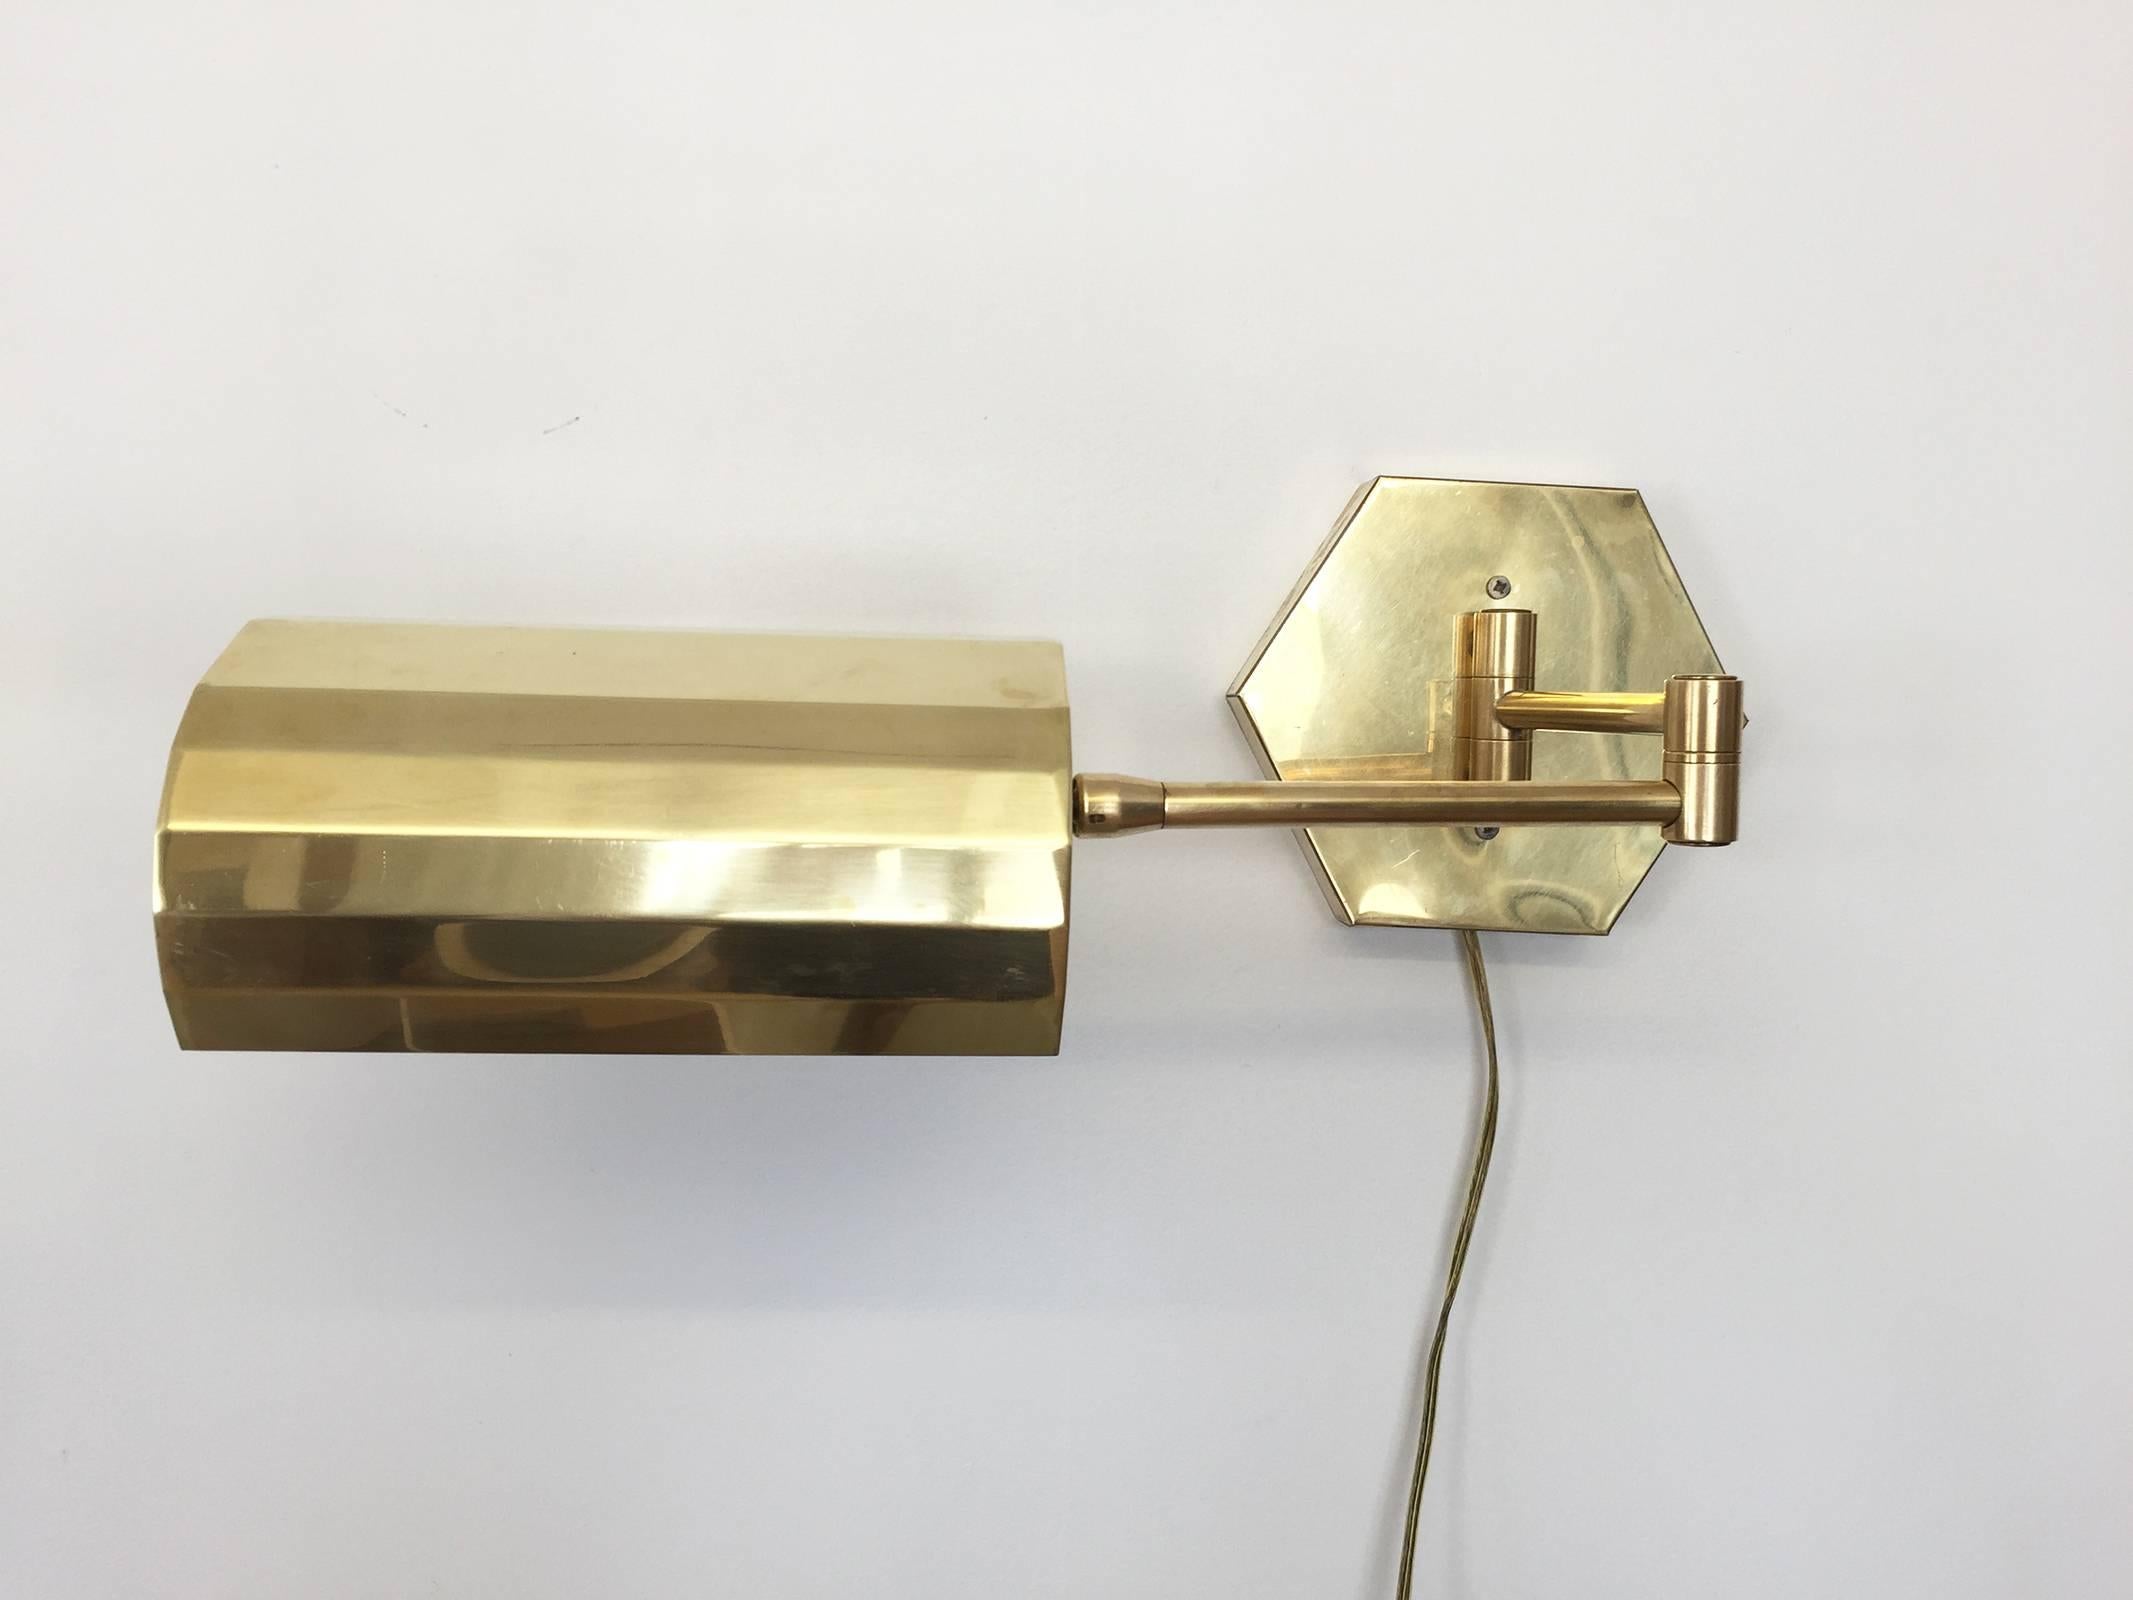 Beautiful vintage articulating swing arm un-lacquered brass wall sconce with octagonal wall plate and faceted brass shade. 

Extends to 21 in. reach.